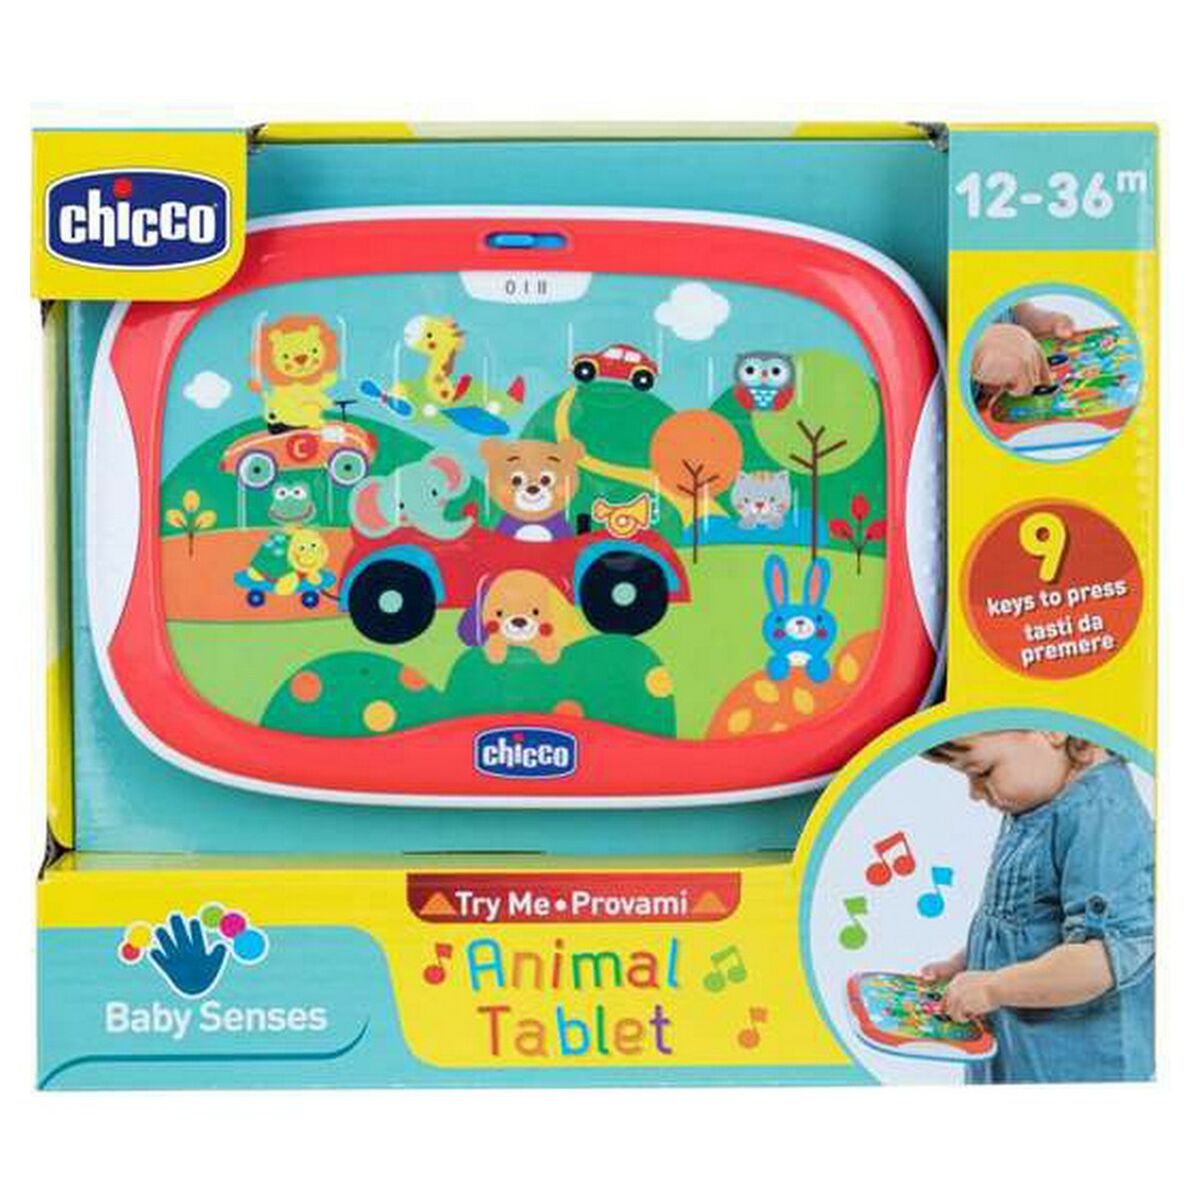 Interactive Tablet for Children Chicco (3 Units), Chicco, Toys and games, Electronic toys, interactive-tablet-for-children-chicco-3-units, Brand_Chicco, category-reference-2609, category-reference-2617, category-reference-2626, category-reference-t-11190, category-reference-t-11203, category-reference-t-19663, Condition_NEW, para los más peques, Price_20 - 50, RiotNook